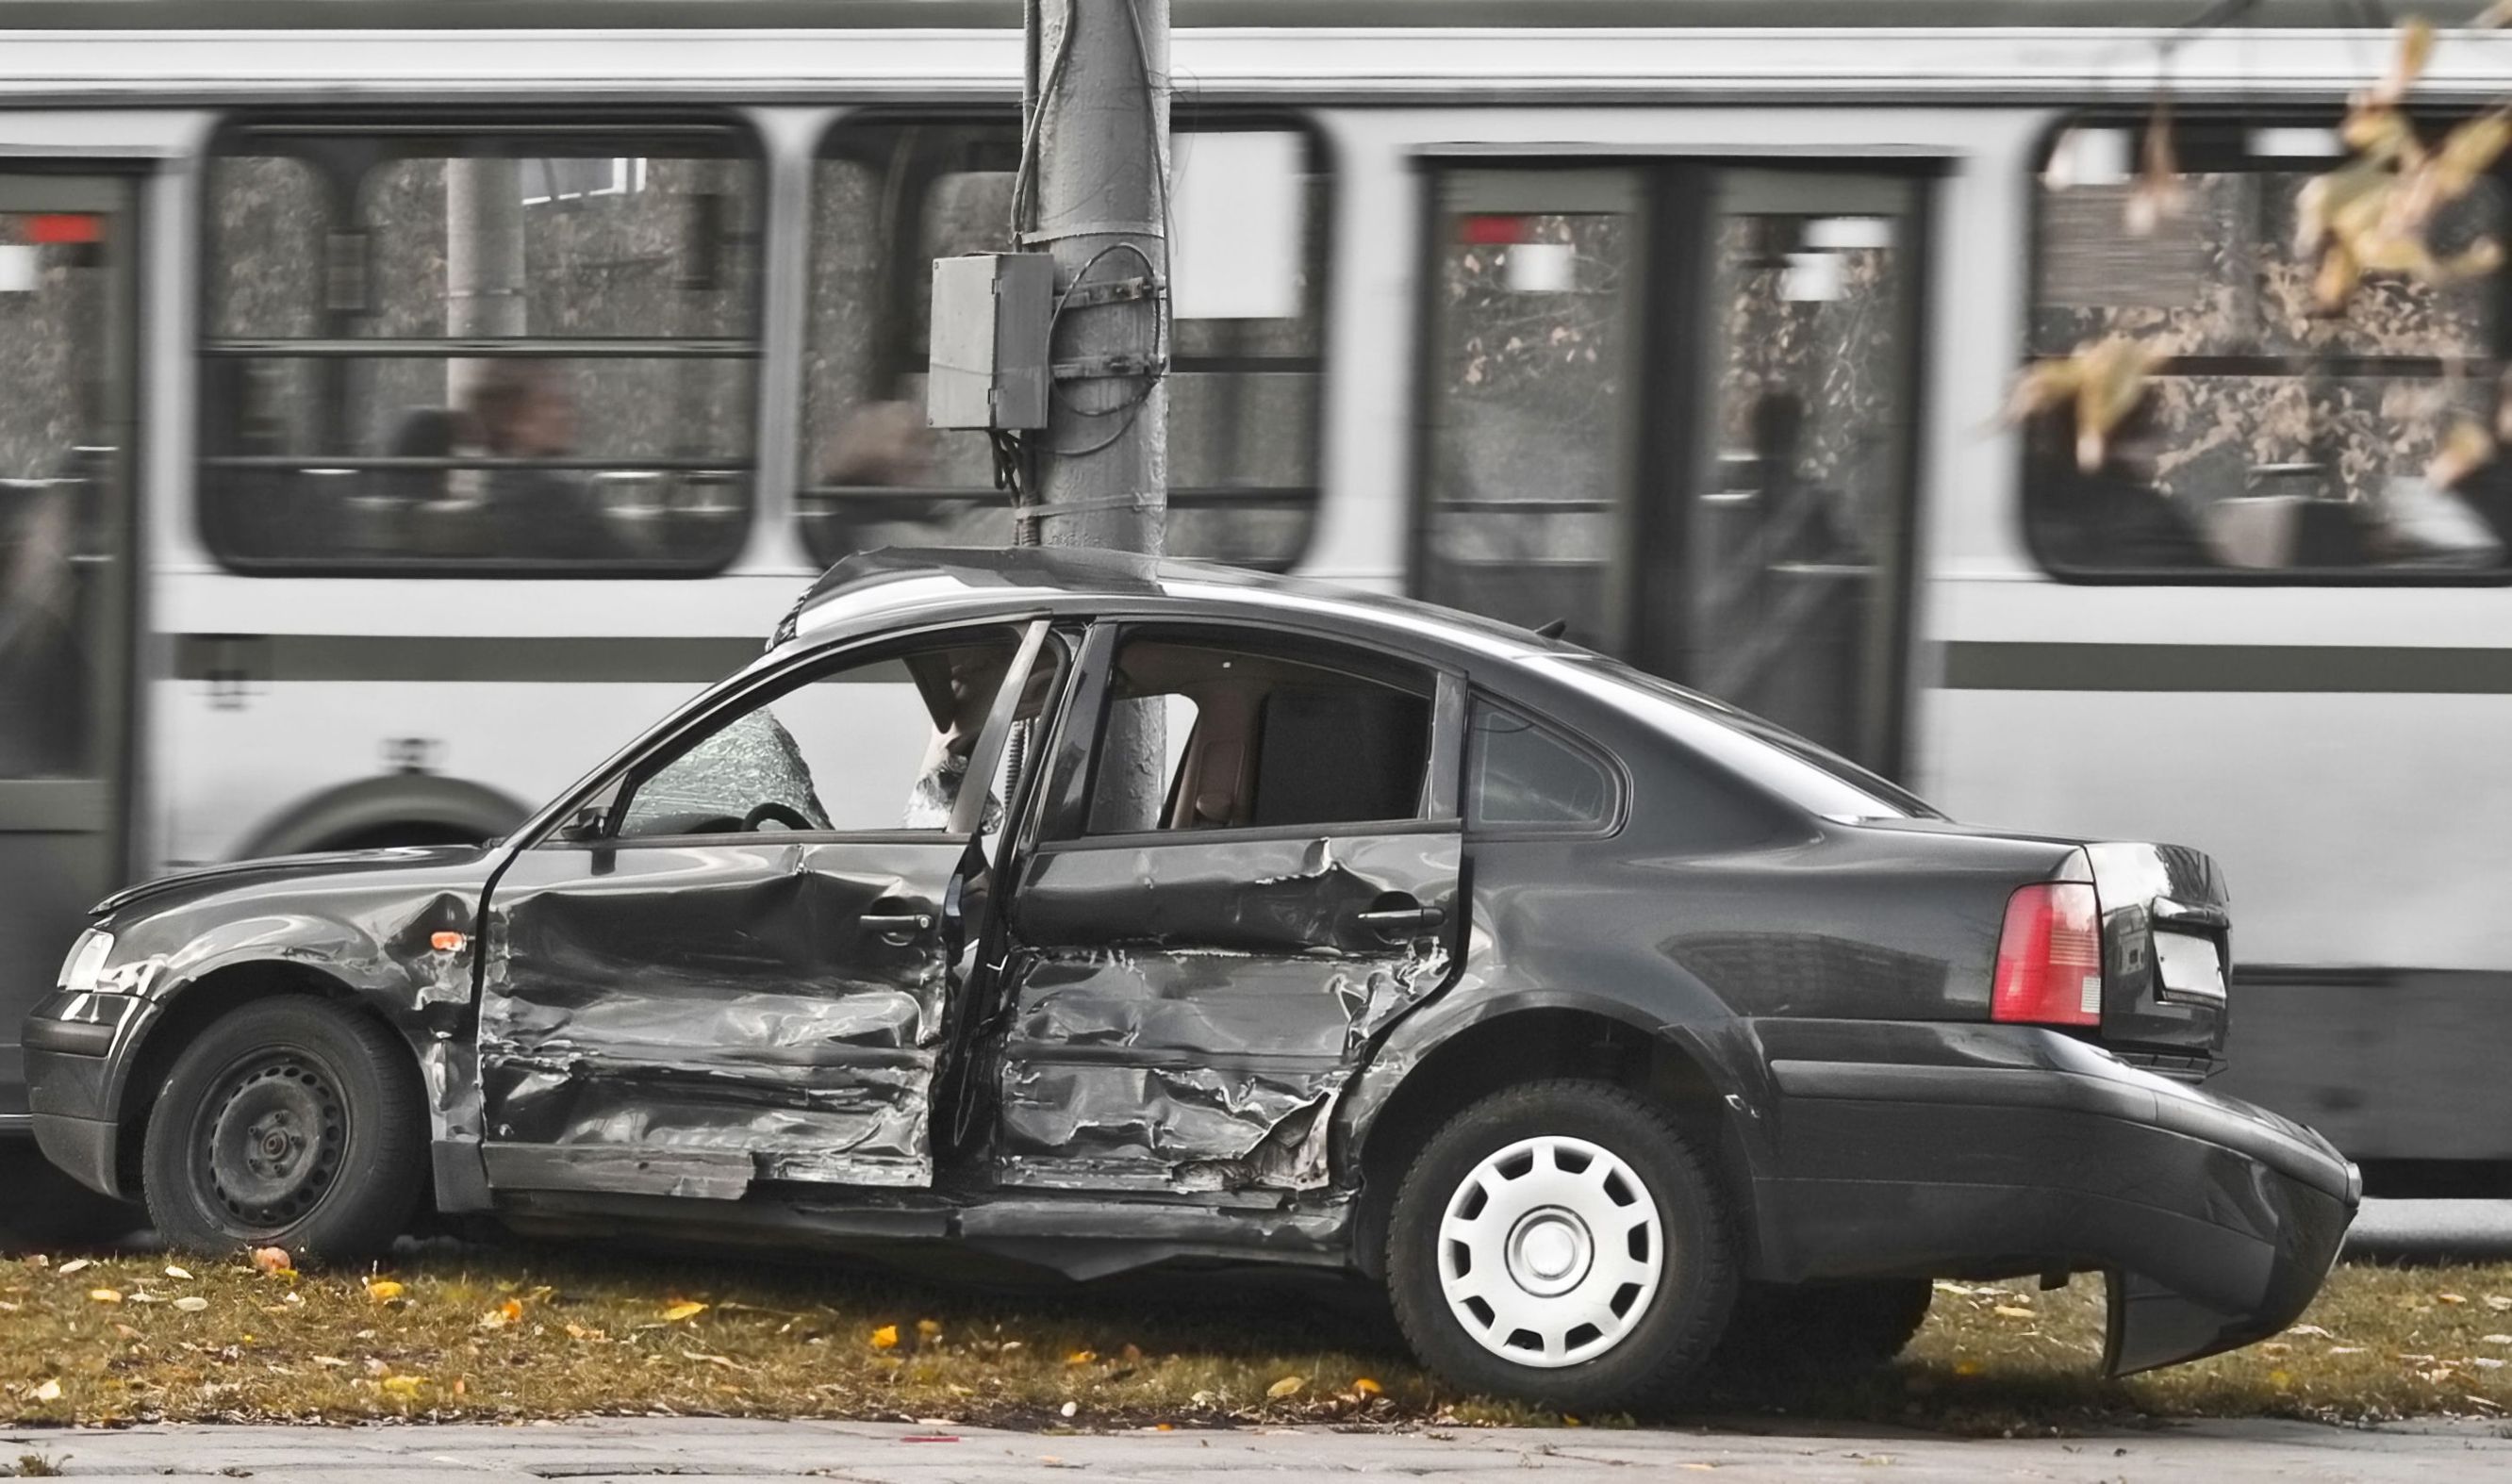 Why Hire Accident Lawyers in Live Oak, FL?